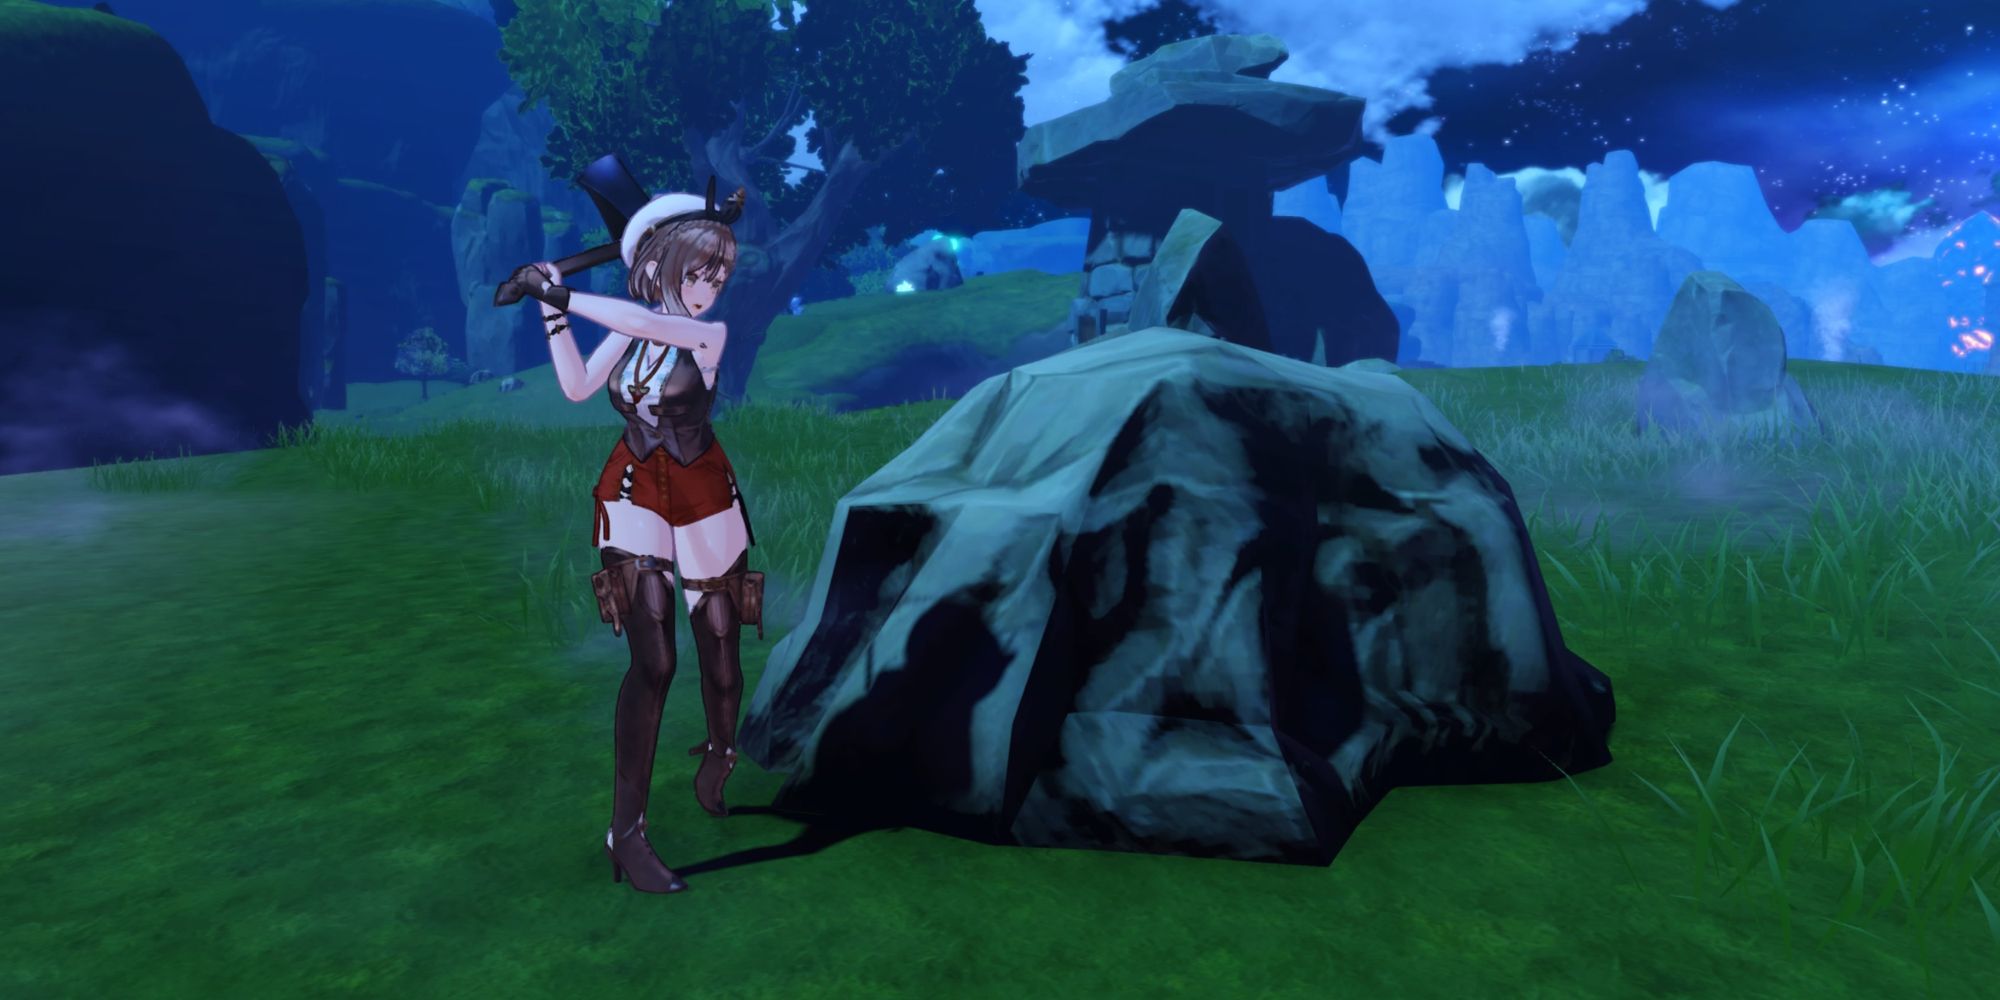 Ryza getting ready to hit a large boulder with an Axe to Gather its Materials in Atelier Ryza 3: Alchemist Of The End & The Secret Key